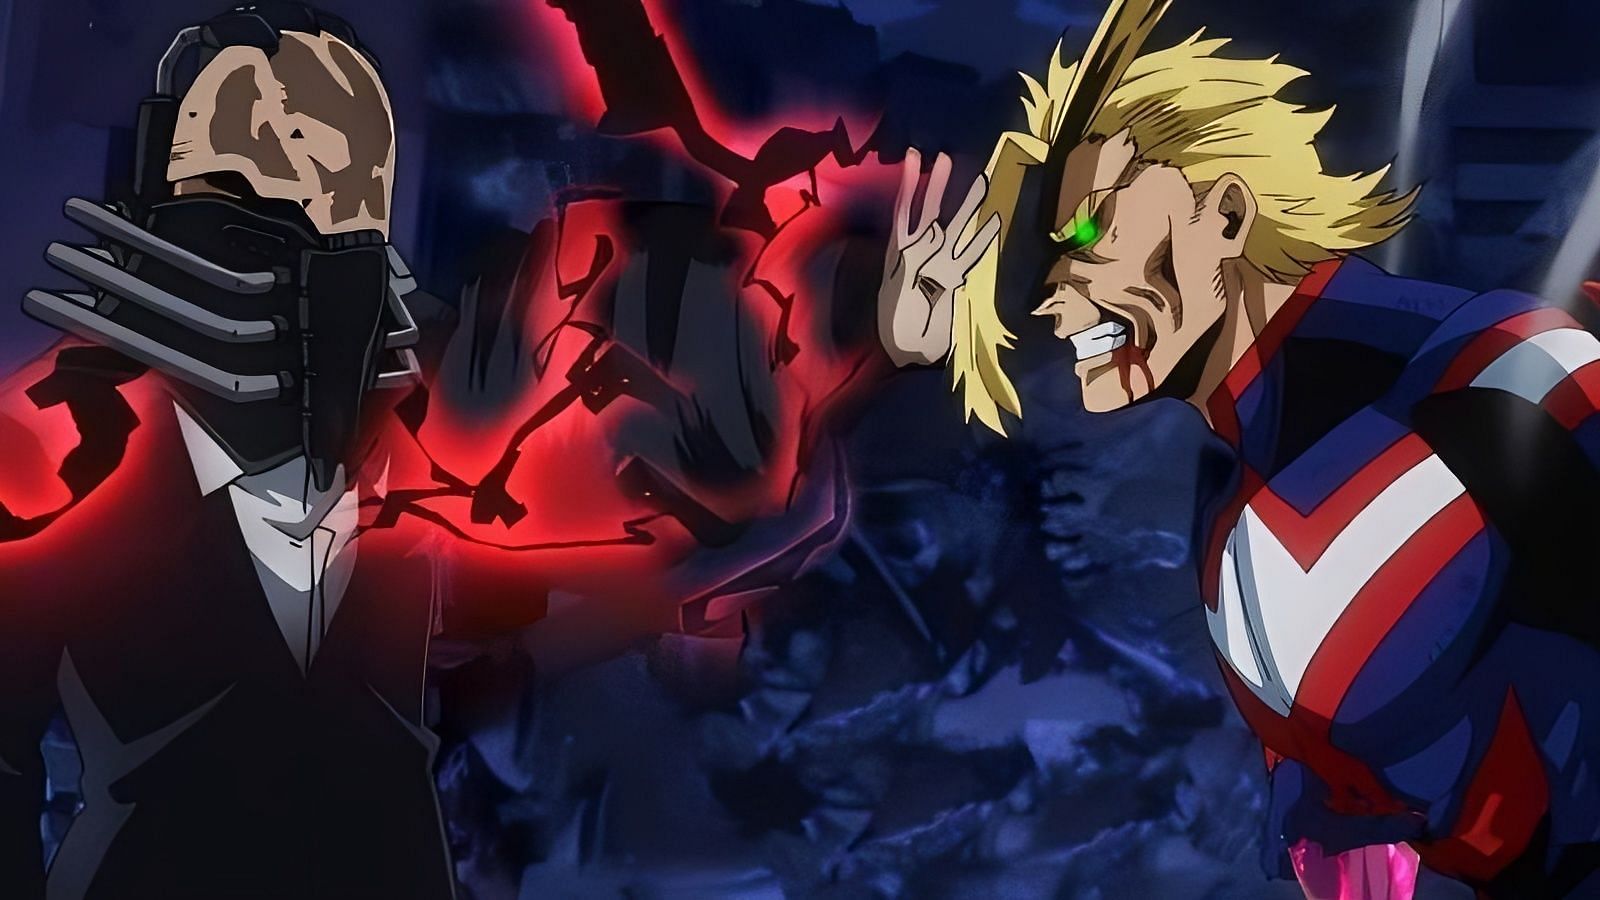 10 Most Expensive Anime Series Fight Scene, Ranked